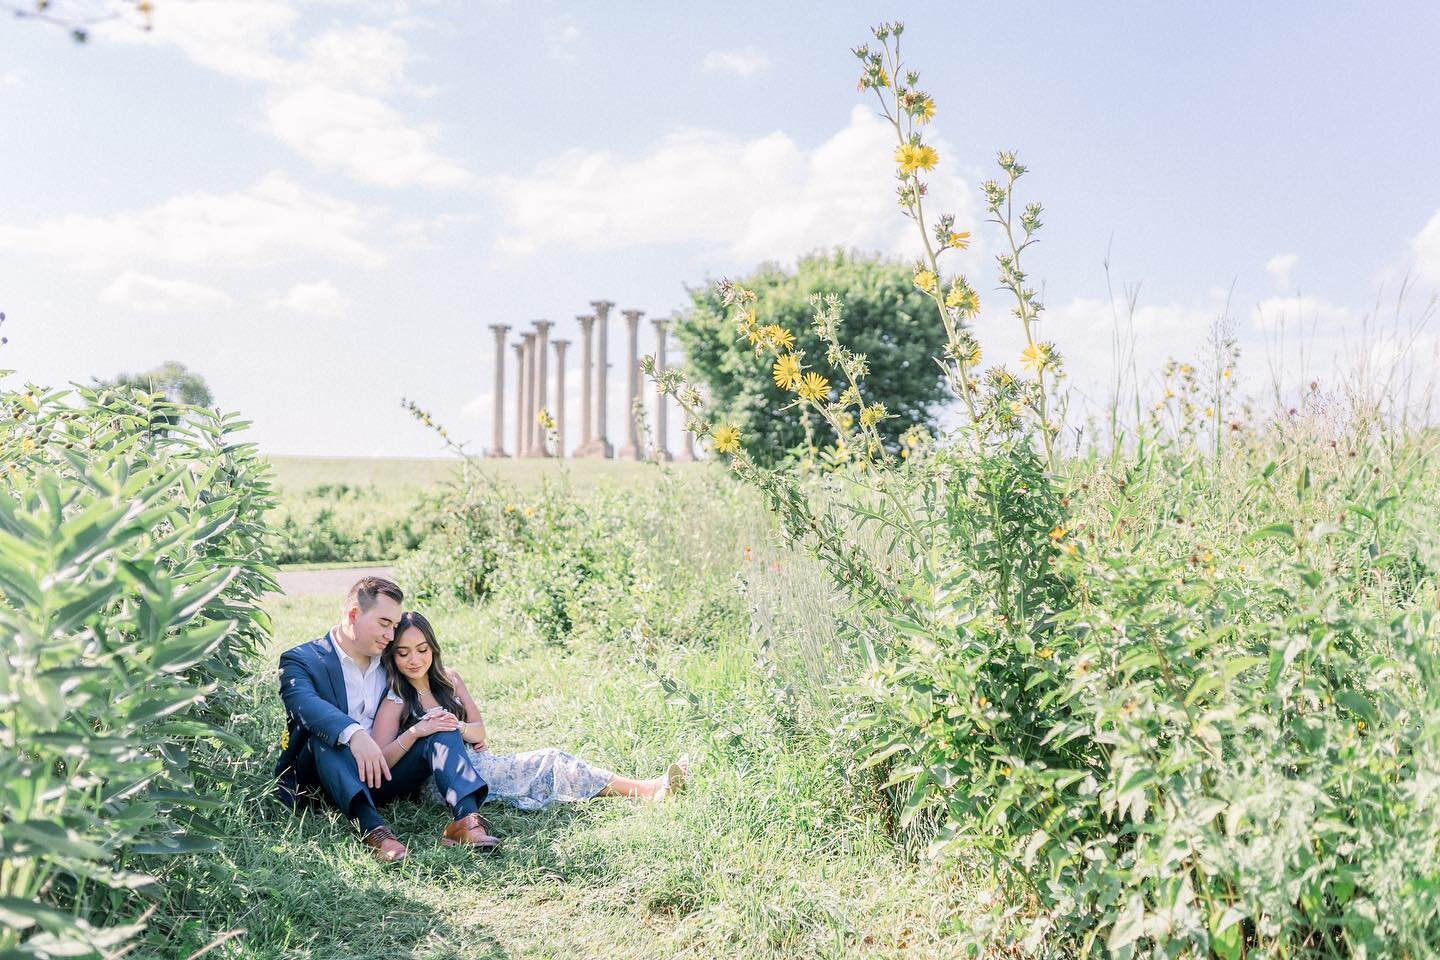 So many favs from Camille &amp; Zach&rsquo;s beautiful engagement session!

📷: stacie